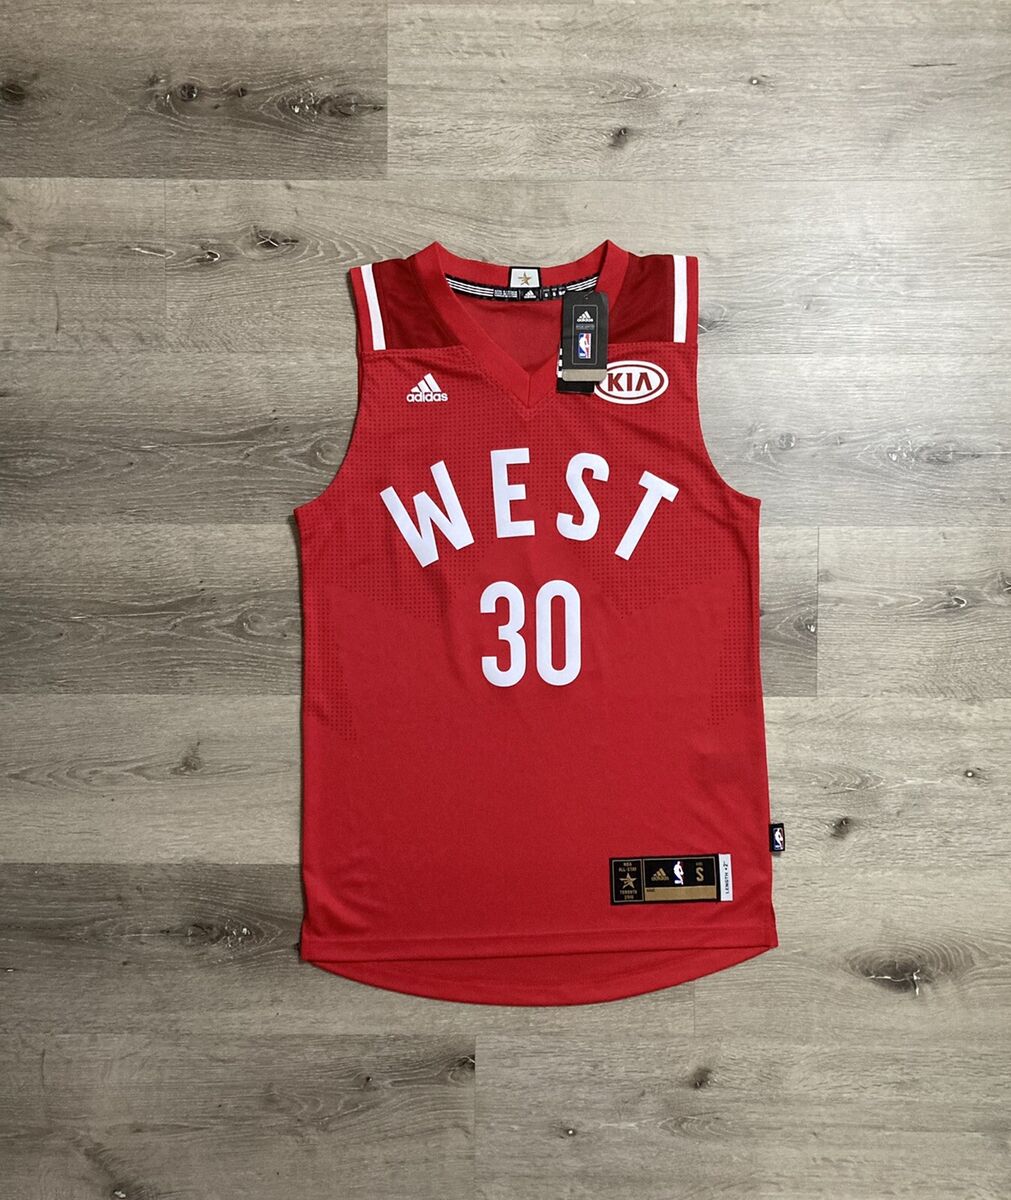 curry nba all star jersey